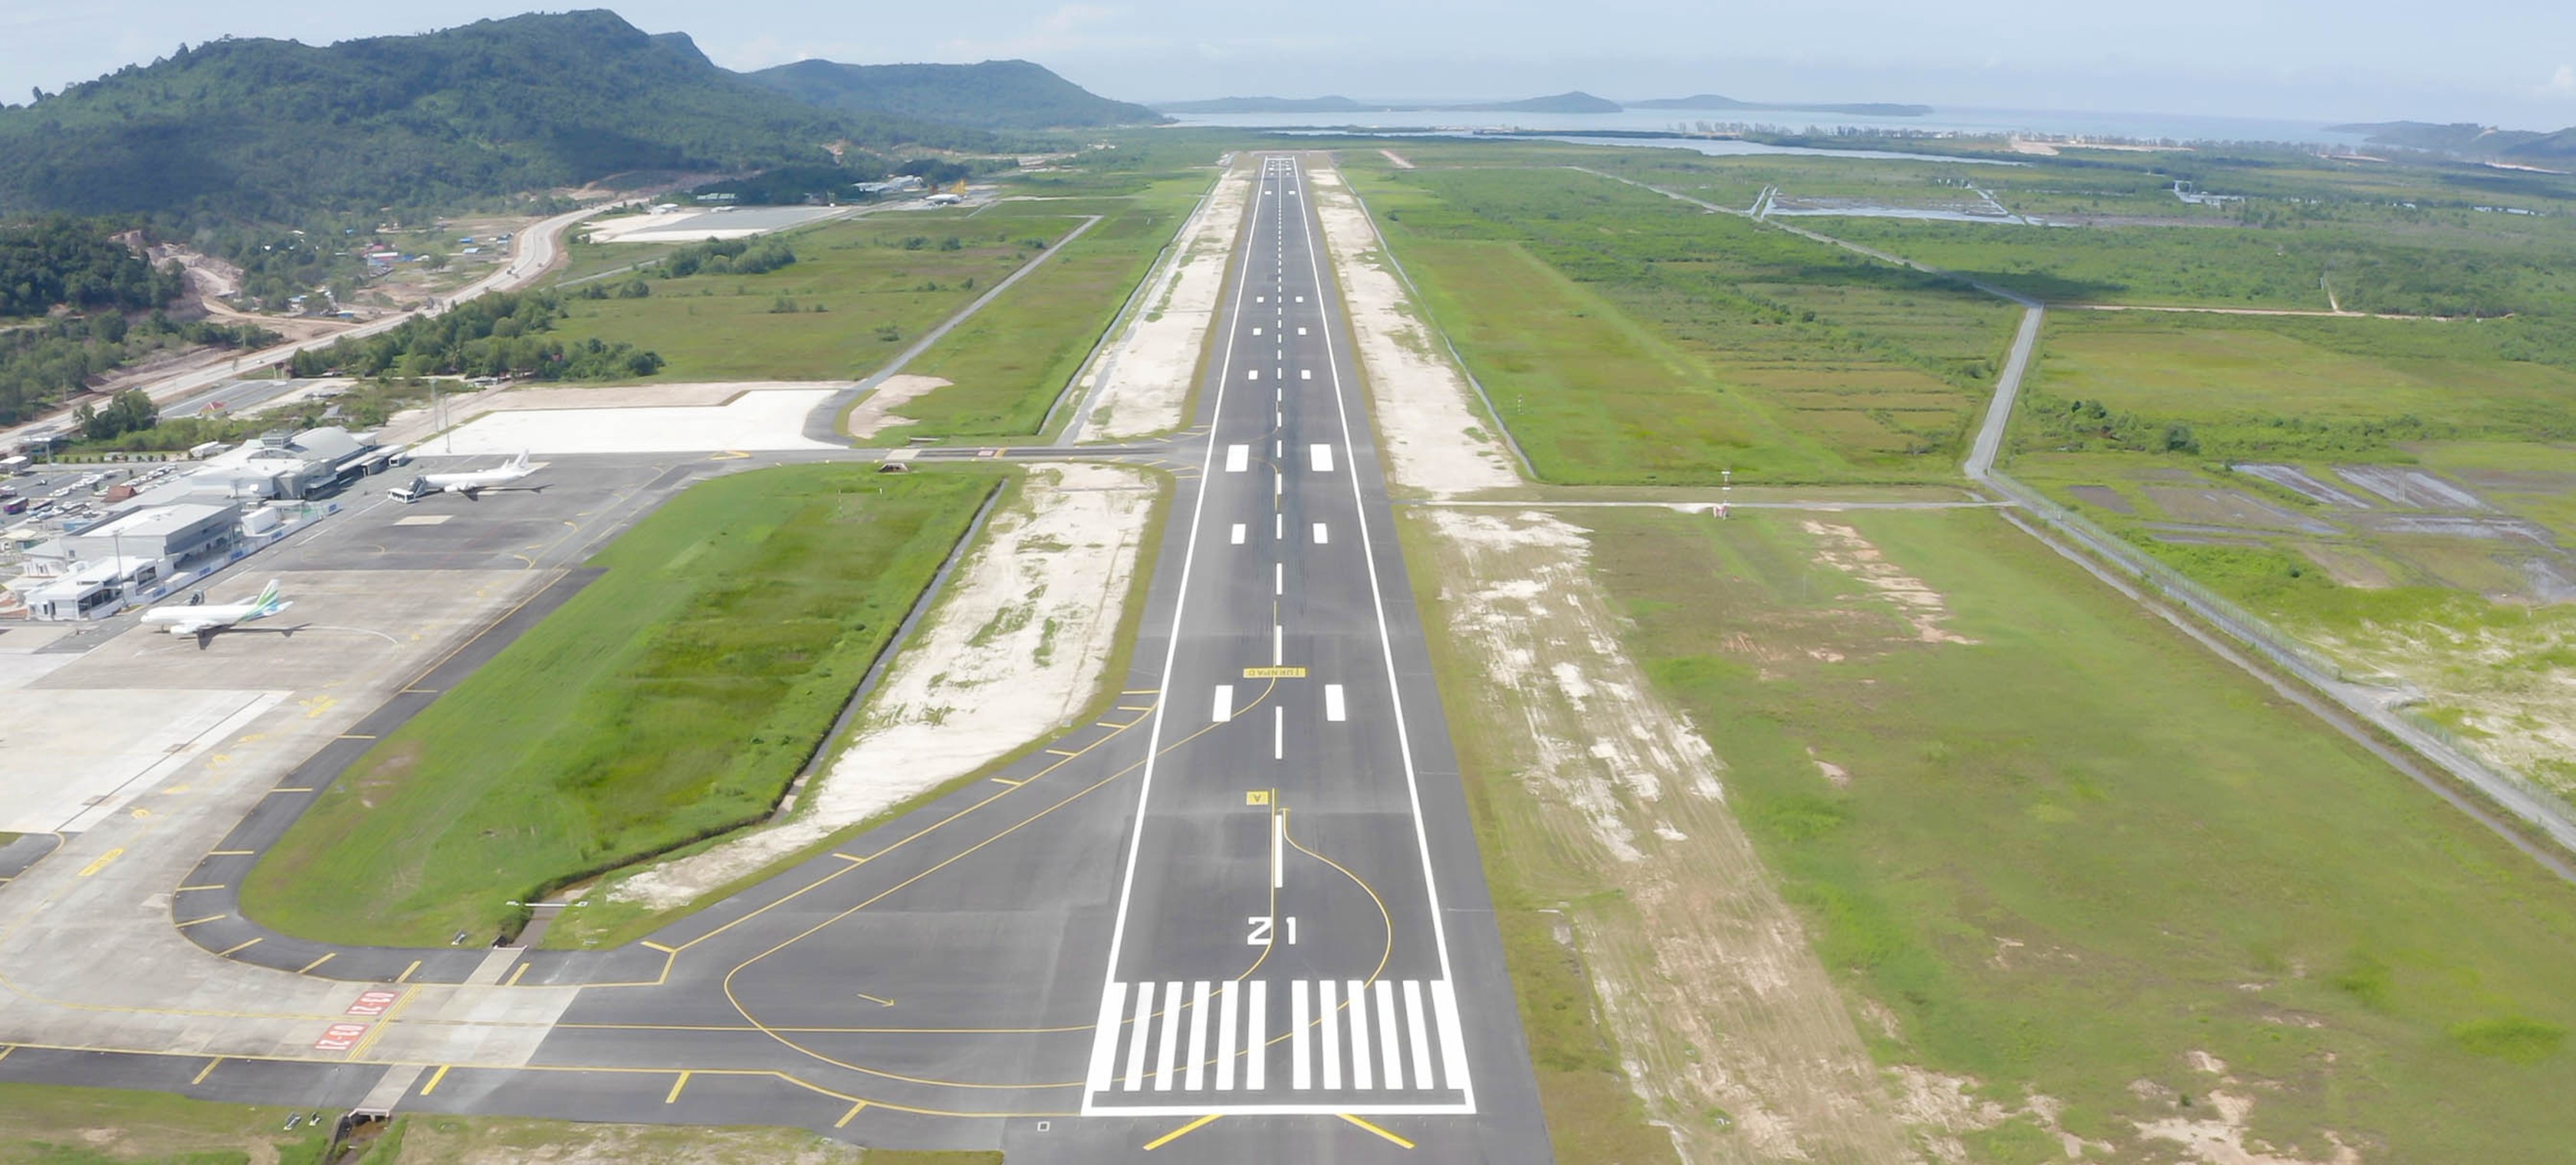 VINCI Airports  Unveils  Plan  on  Building  New Terminal  of  Sihanoukville International Airport, Operations expected by 2026.